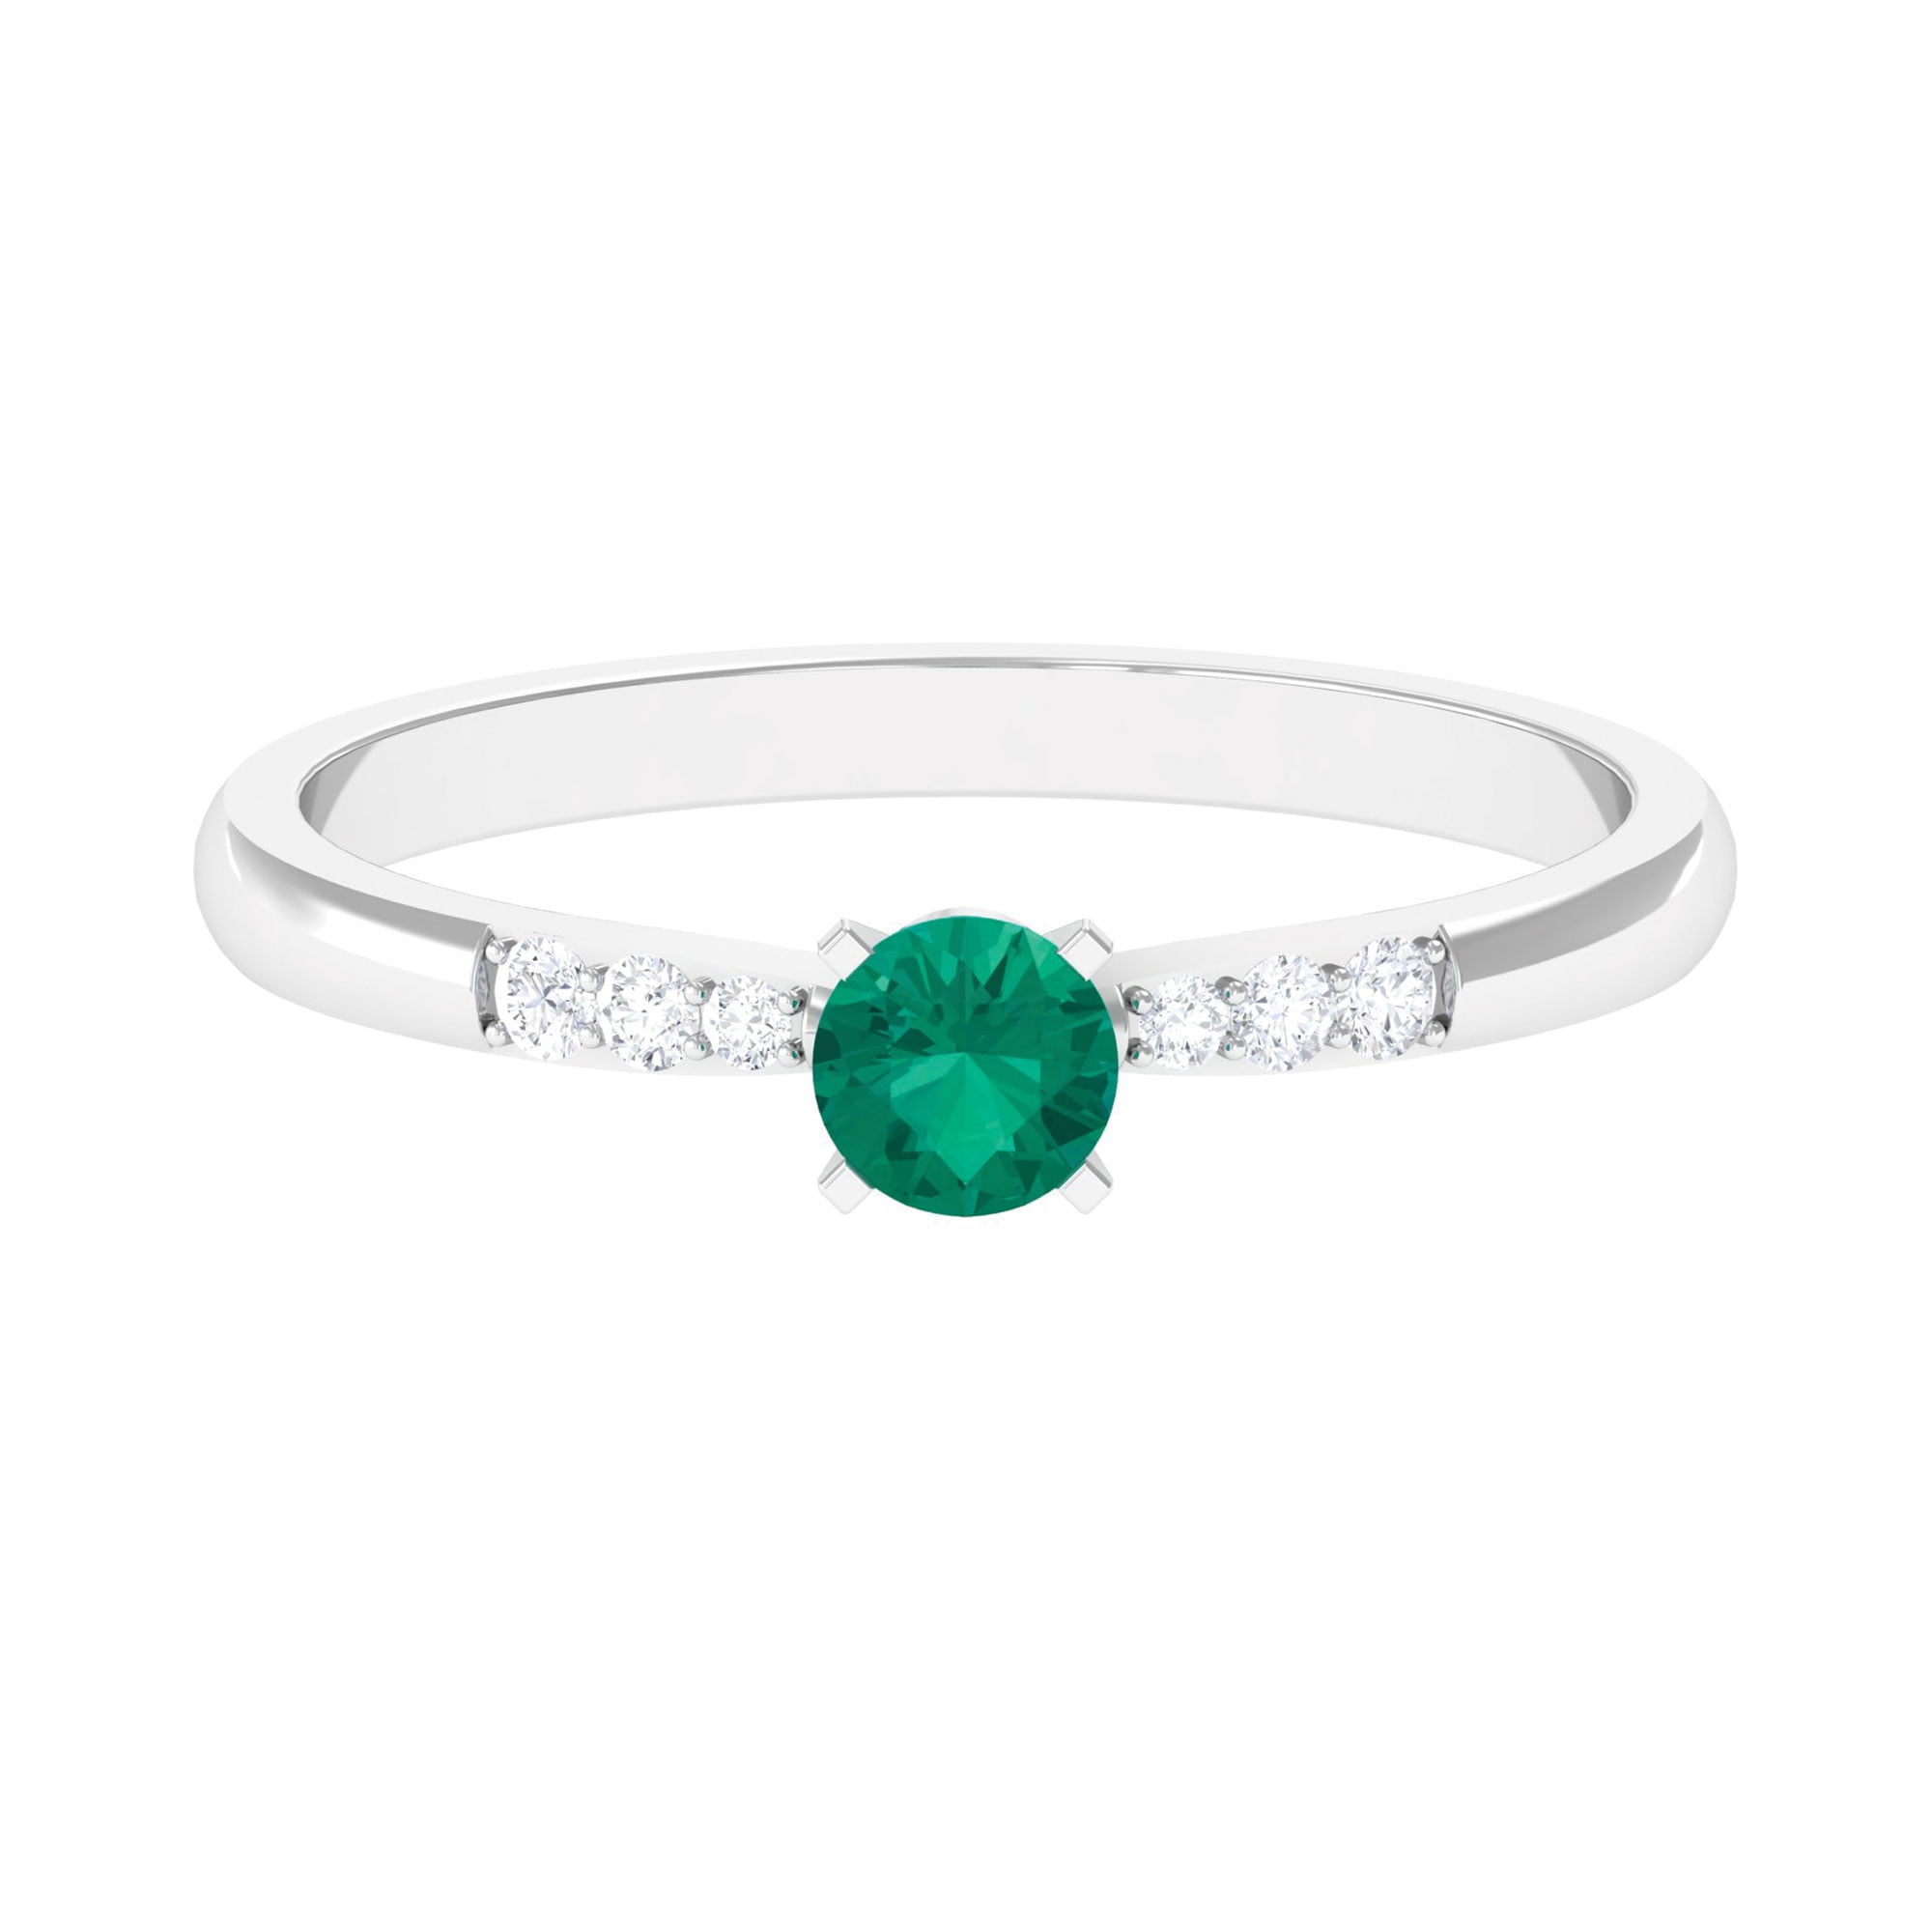 Real Emerald Gemstone, Emerald Ring, Sterling Silver Men's Ring|Amazon.com